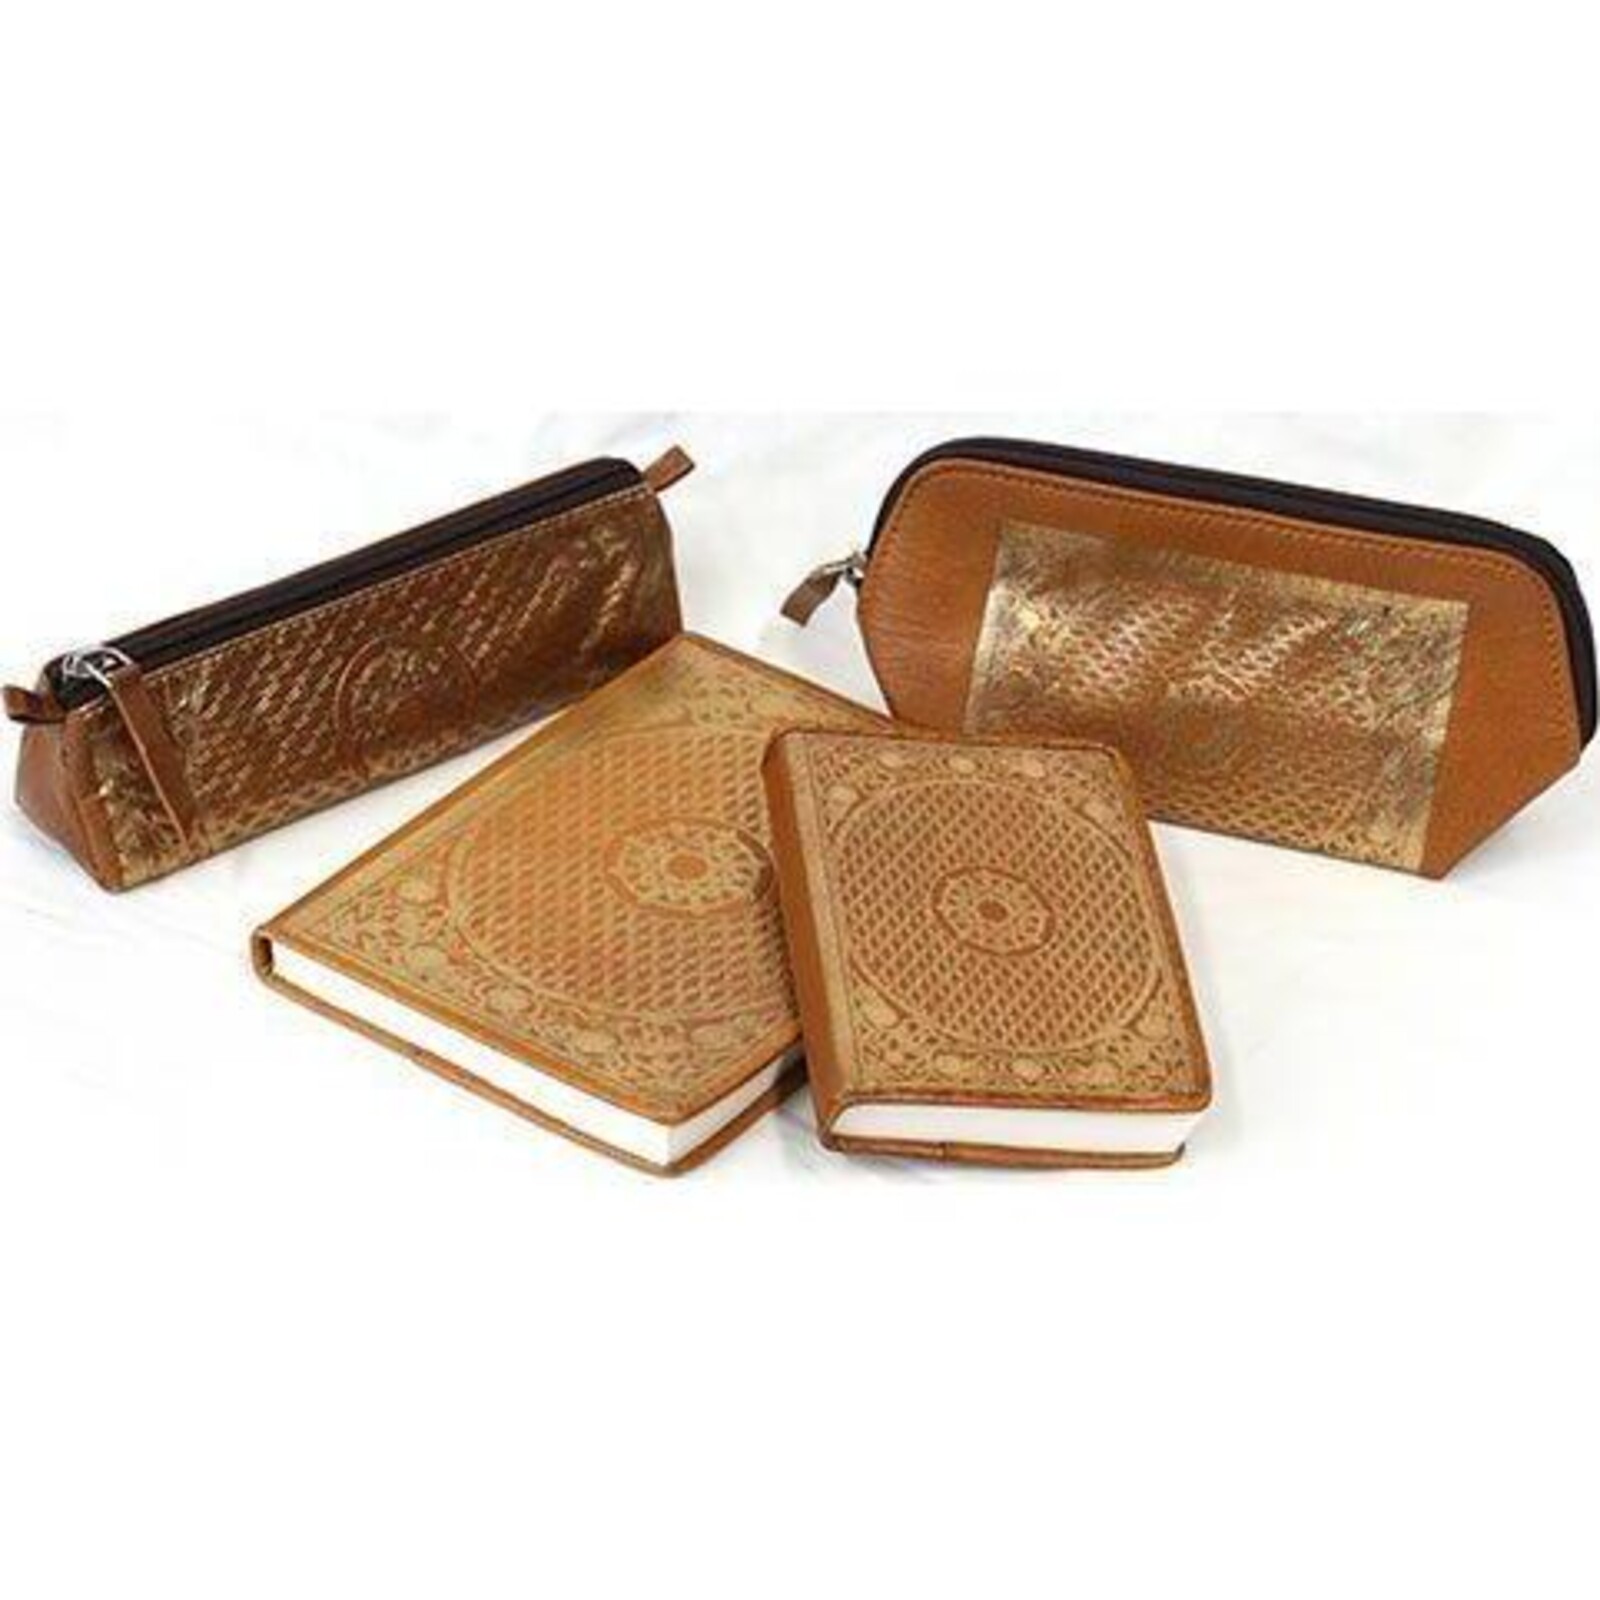 Leather Pouch Gold Coin Large